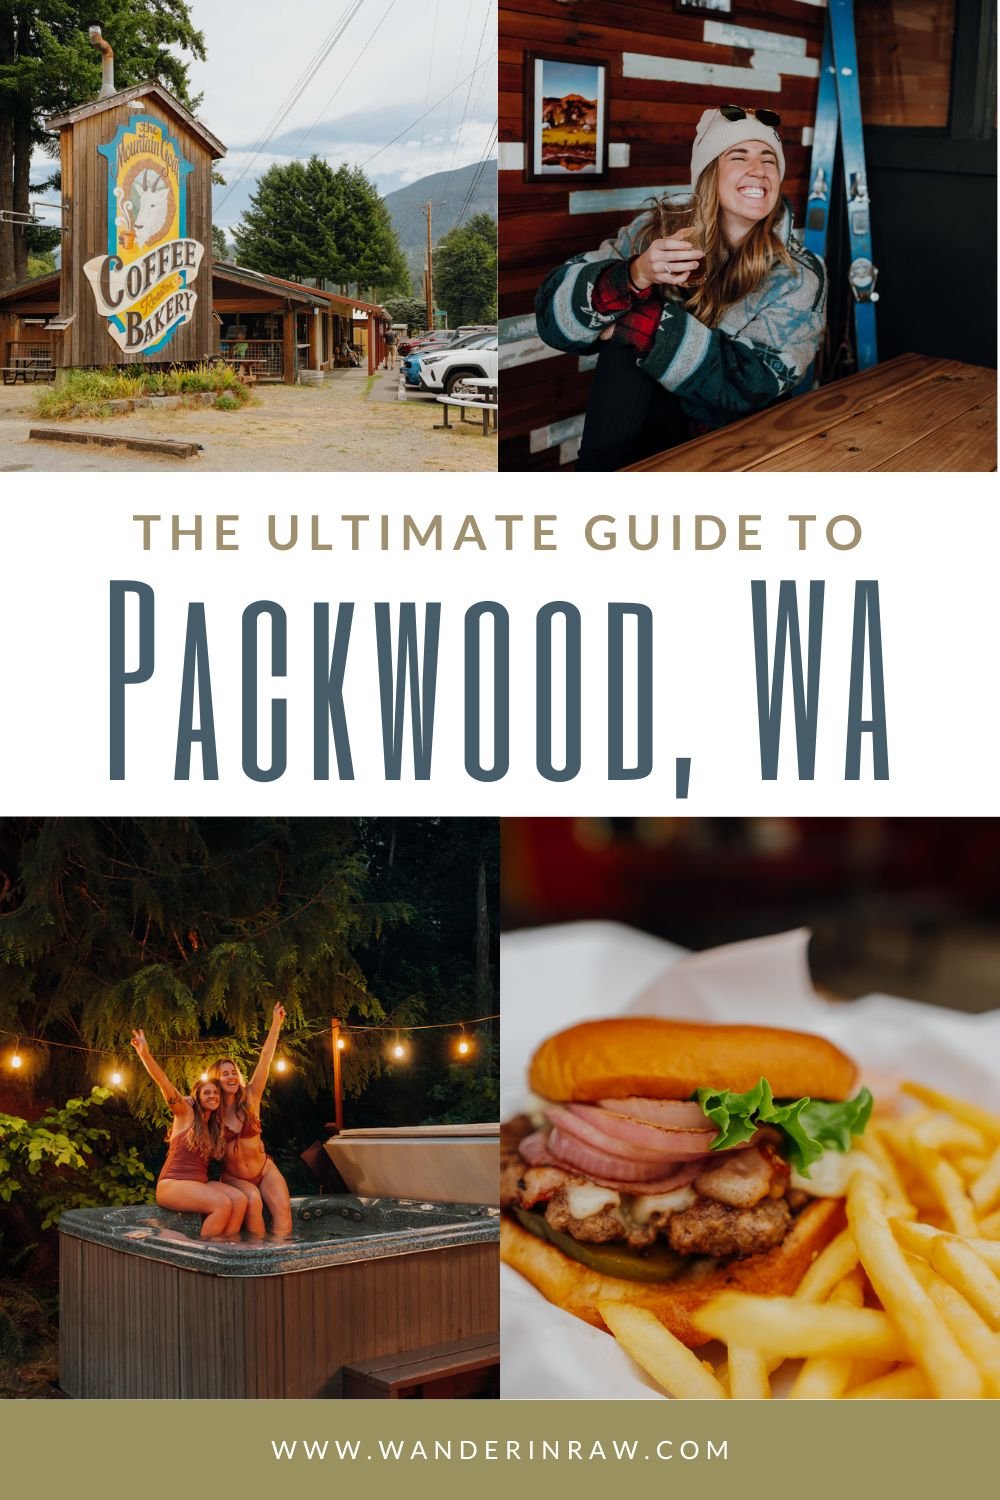 The Ultimate Guide to Packwood